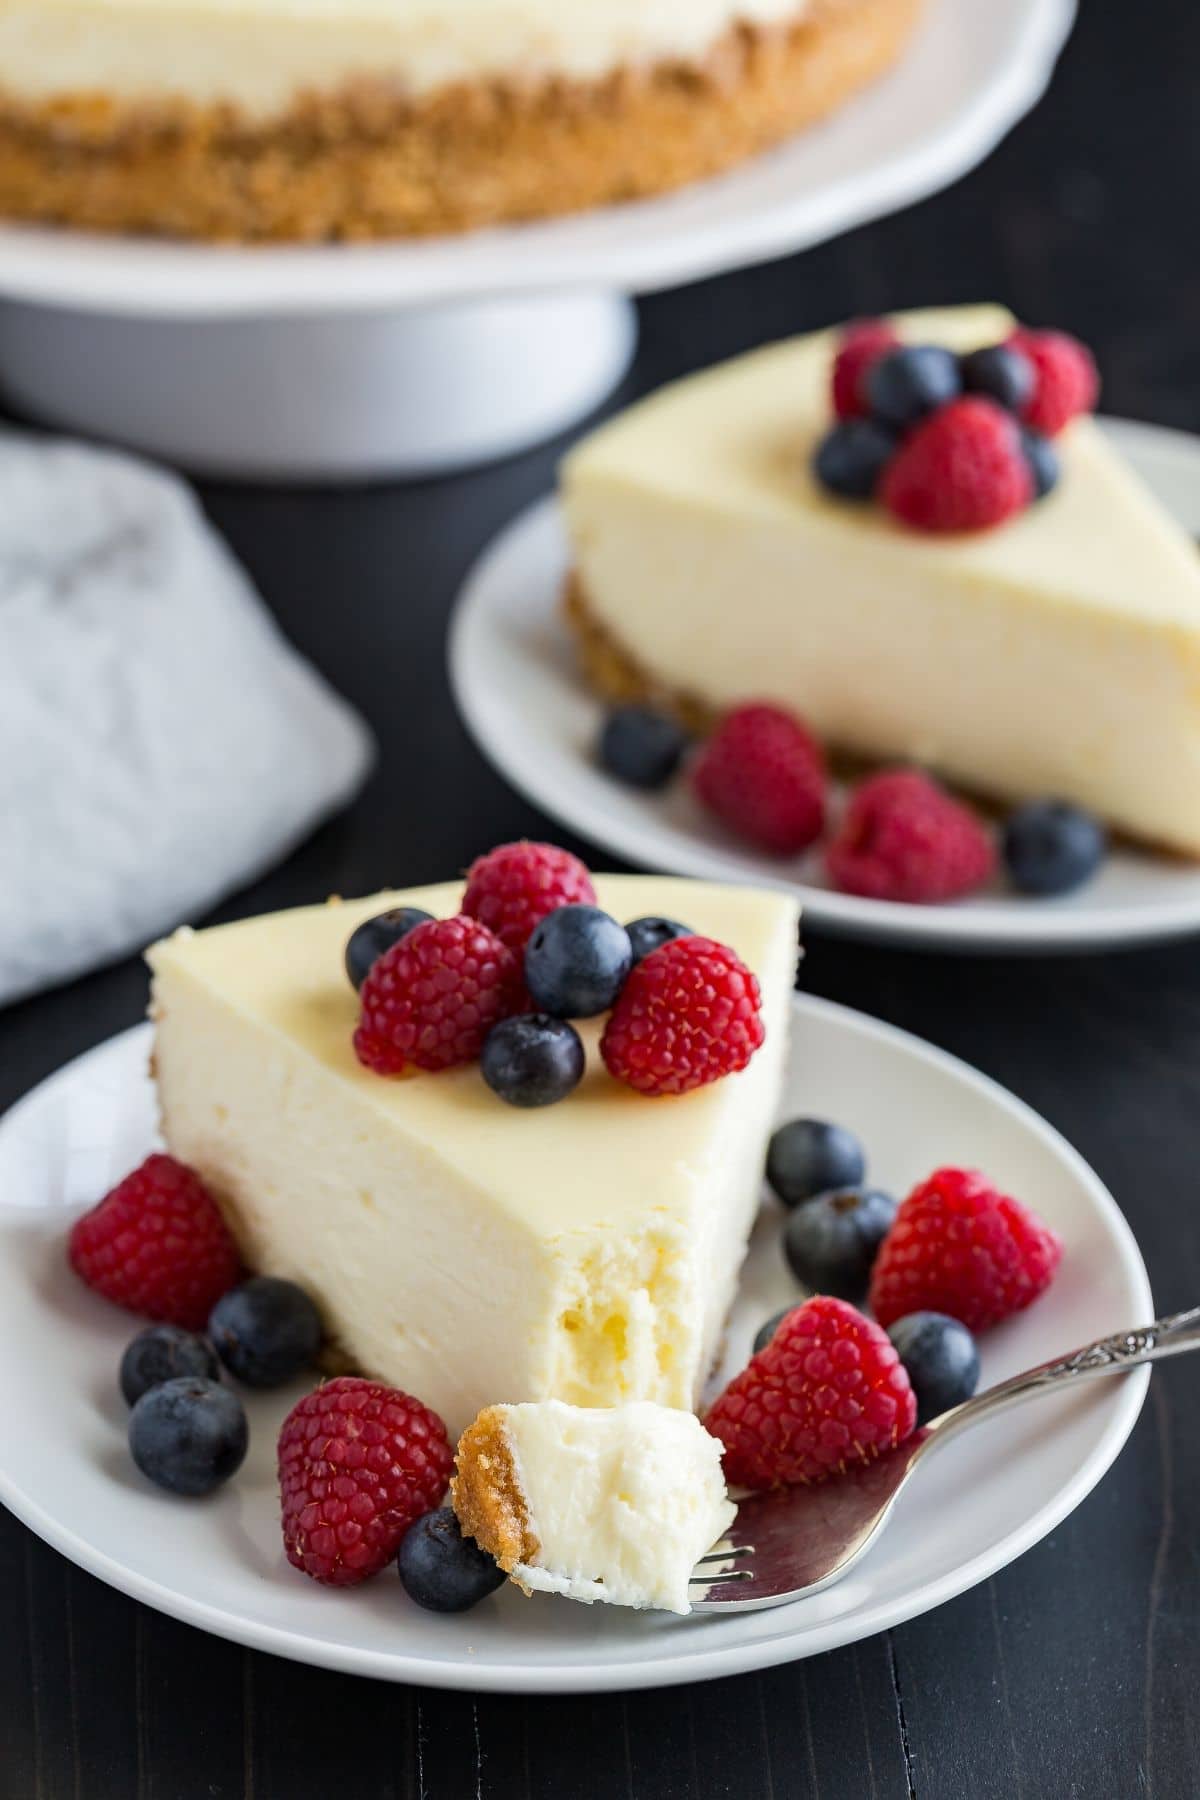 A slice of cheesecake topped with fresh berries and a fork taking out a bite.